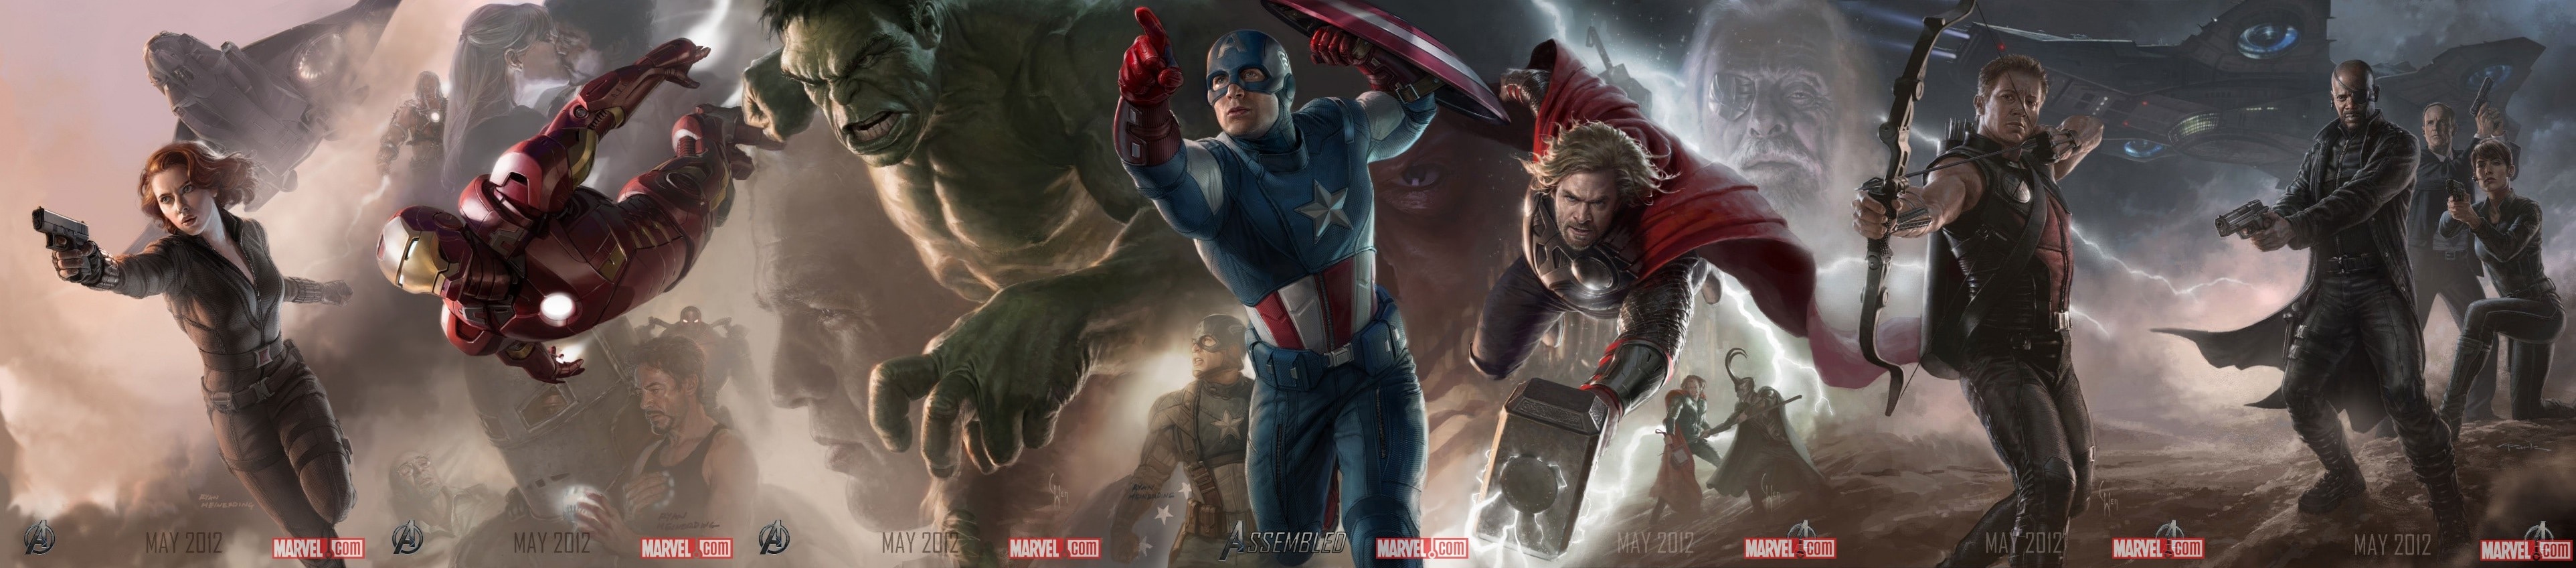 Marvel’s-The-Avengers-Character-Art-Poster-Triptyque 